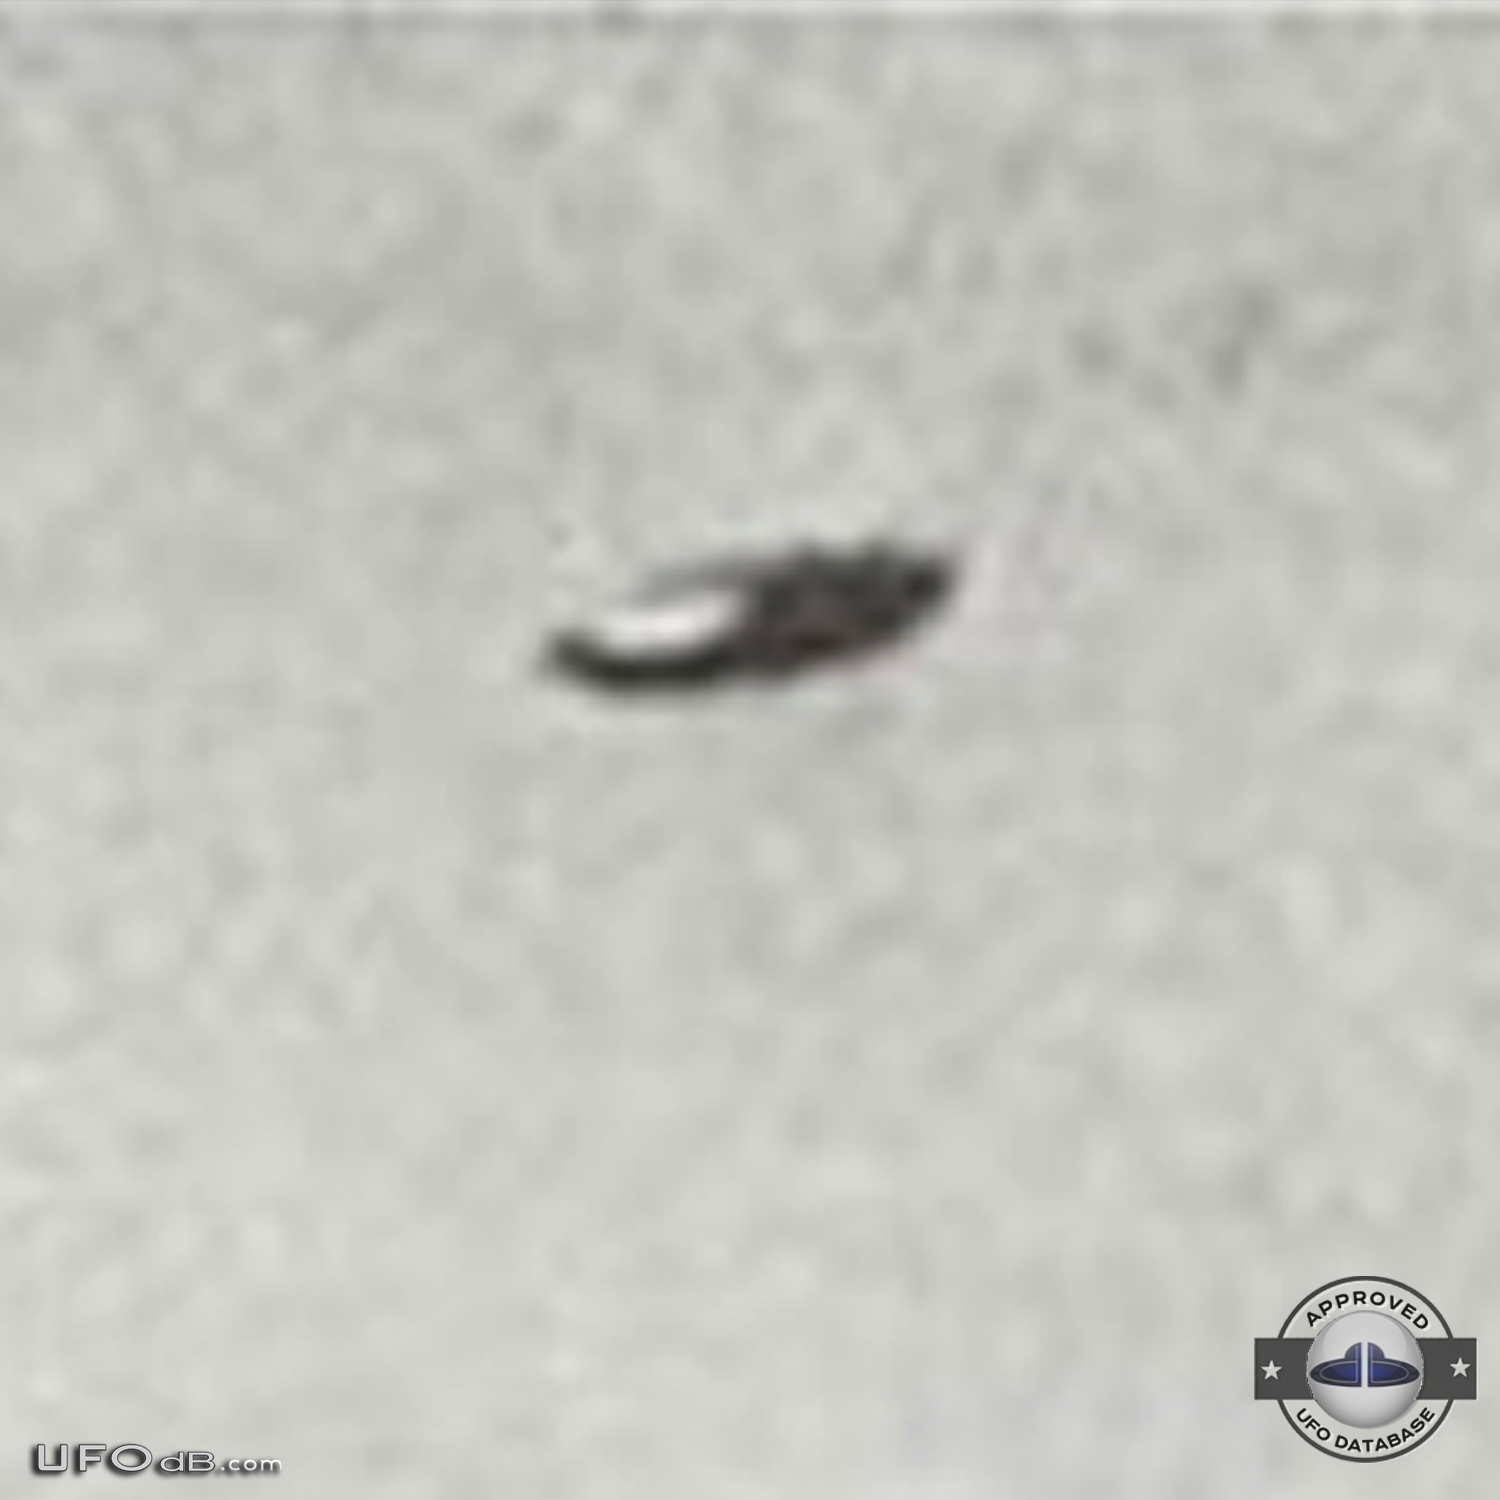 1967 Calgary UFO picture considered to be in the top 10 of all times UFO Picture #448-4